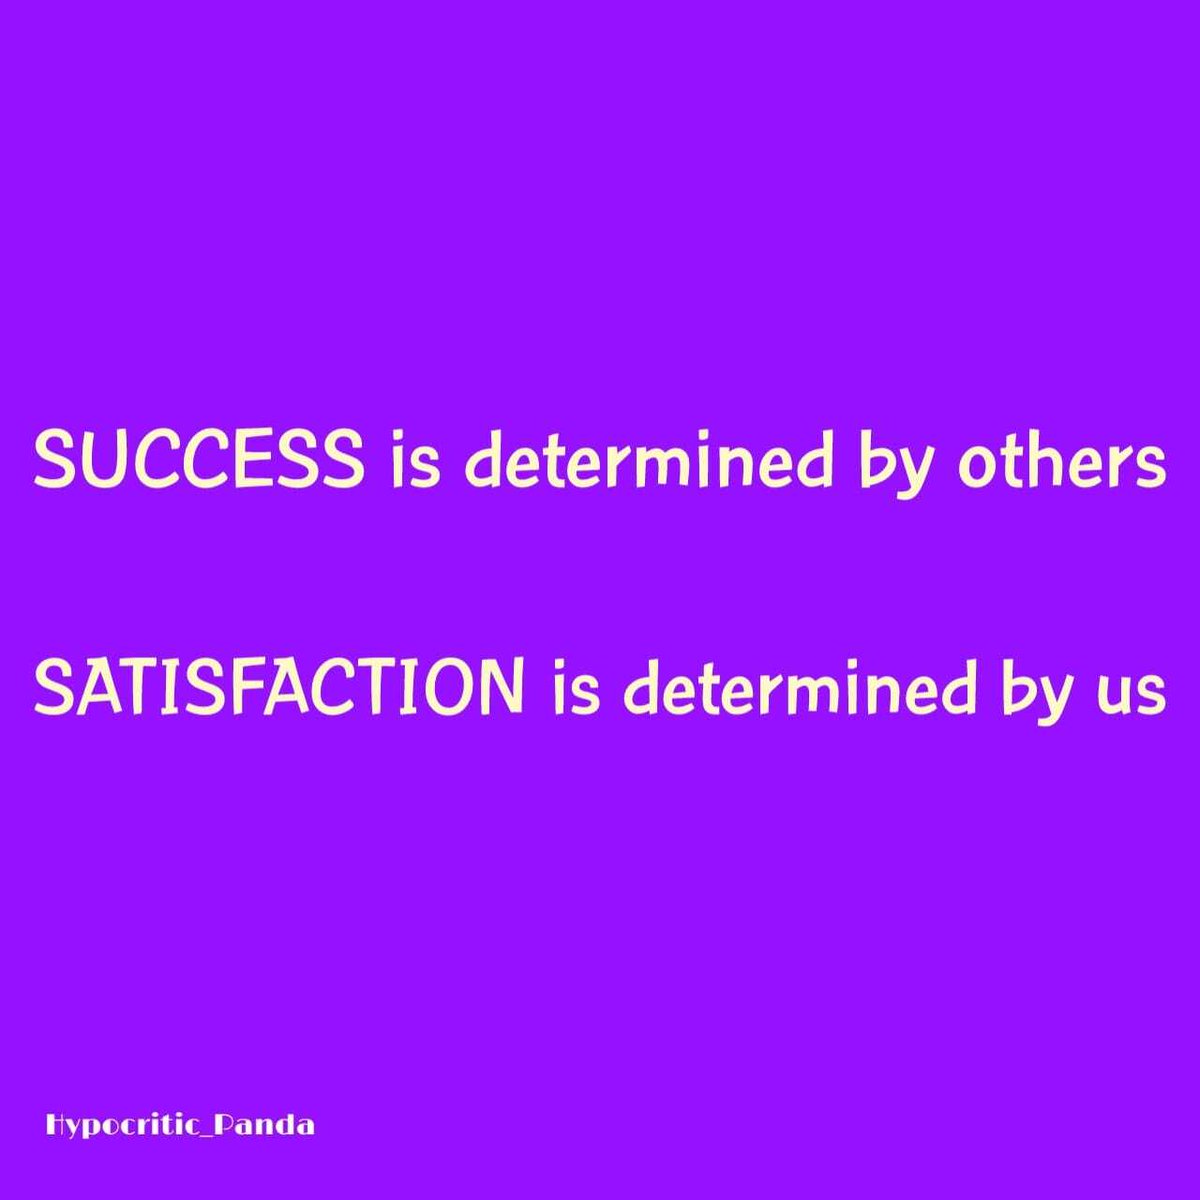 #Success is #determined by others
#Satisfaction is #determined by us
#successquotes #successful #successmindsset  #successfulwomen #successquote #successcoach#successstory #successtip#successfulmindset#successminded#successdriven #successmotivation #successfulstoner #successm